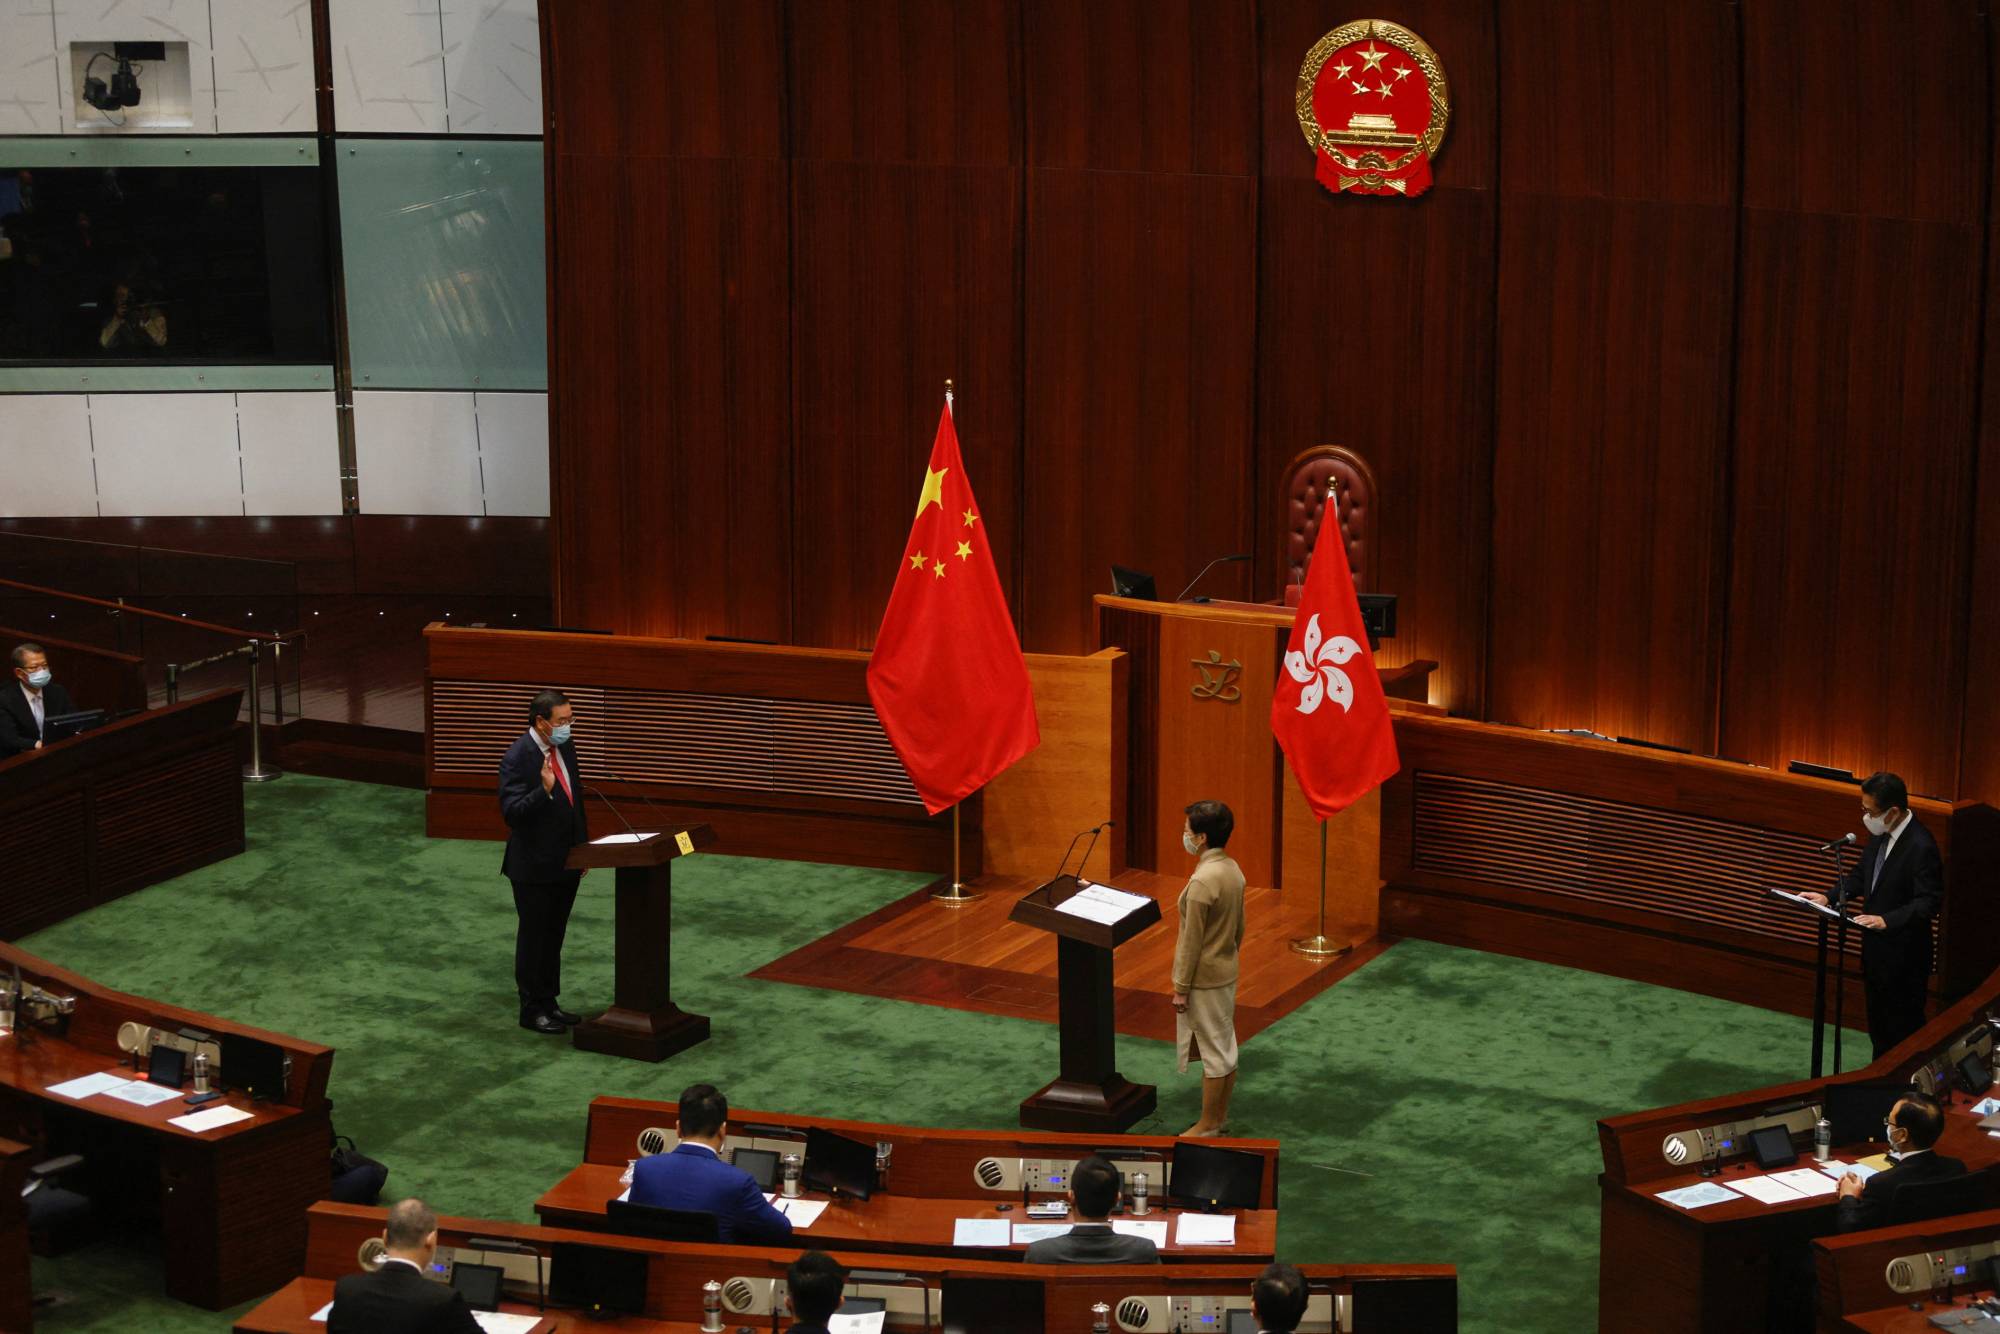 Newly elected lawmaker Andrew Leung Kwan-yuen takes his oath in front of Chief Executive Carrie Lam at the Legislative Council in Hong Kong on Monday. | REUTERS